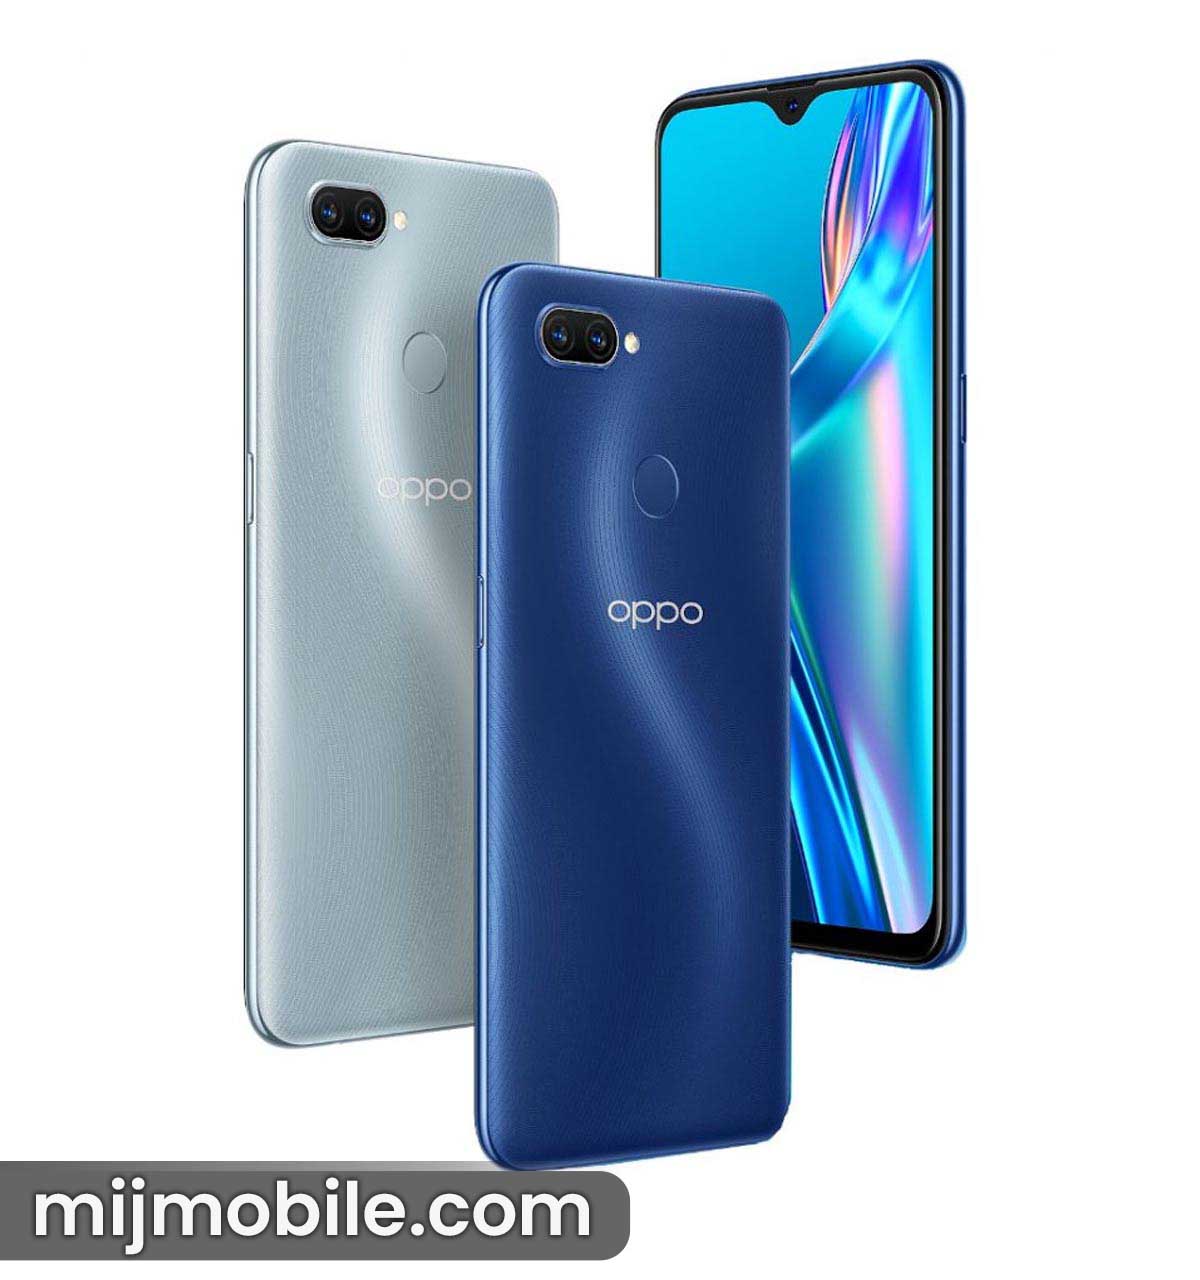 Oppo A12s Price in Pakistan & Specifications Oppo A12s Price in Pakistan is only 23,999. The Mediatek MT6765 Helio P35 Octa-core processor and PowerVR GE8320 GPU power Oppo's latest Smartphone.